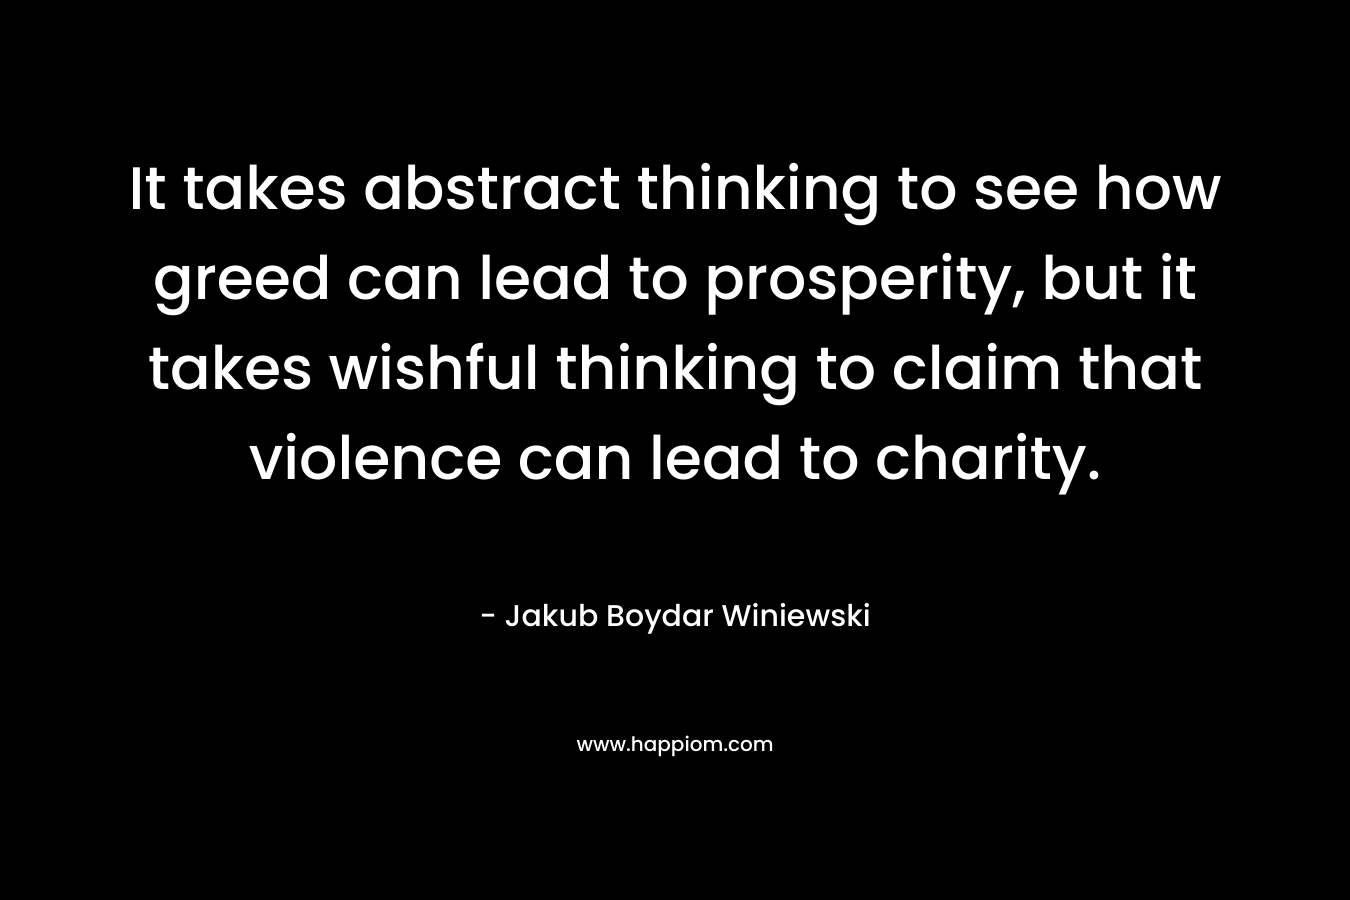 It takes abstract thinking to see how greed can lead to prosperity, but it takes wishful thinking to claim that violence can lead to charity.